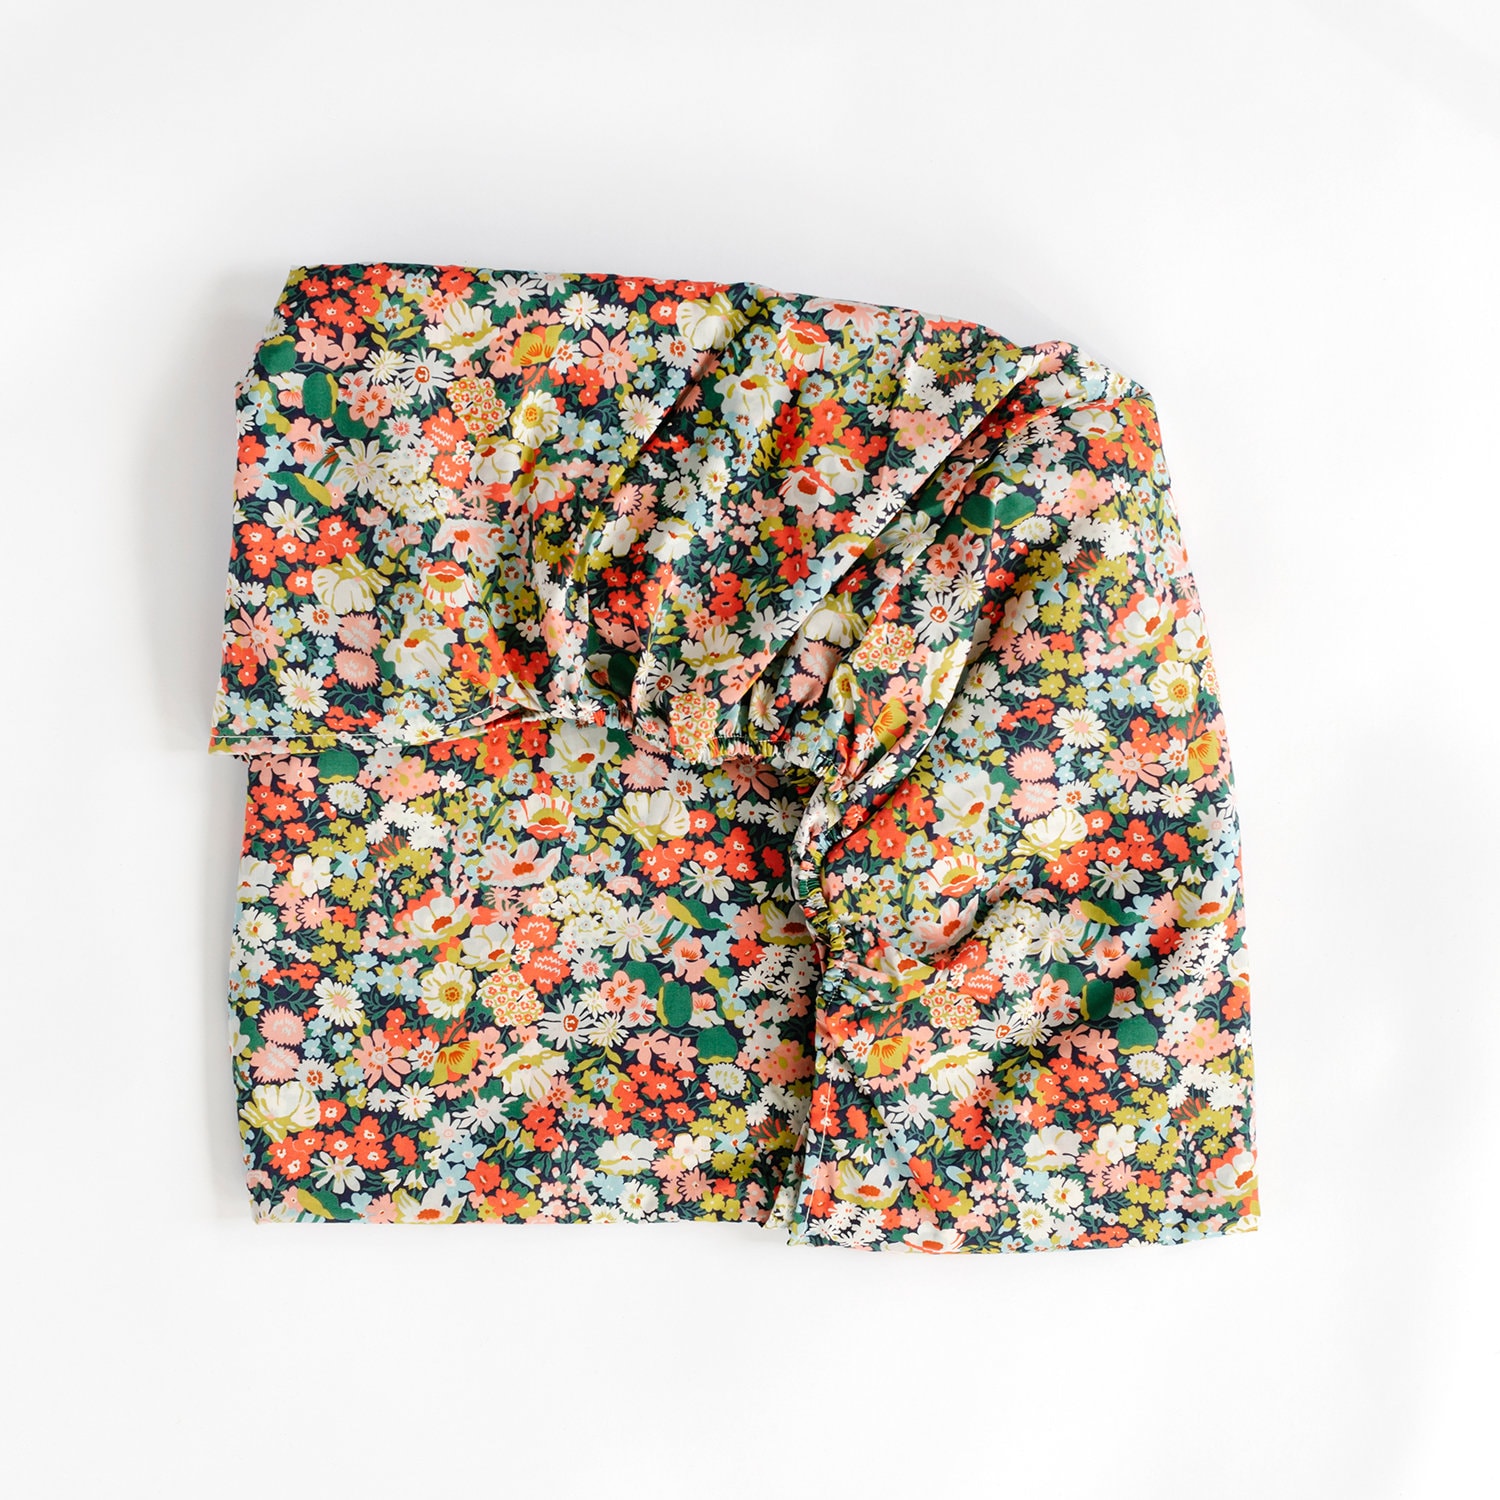 Fitted Sheet Made With Liberty Fabric 'thorpe Green' - Etsy